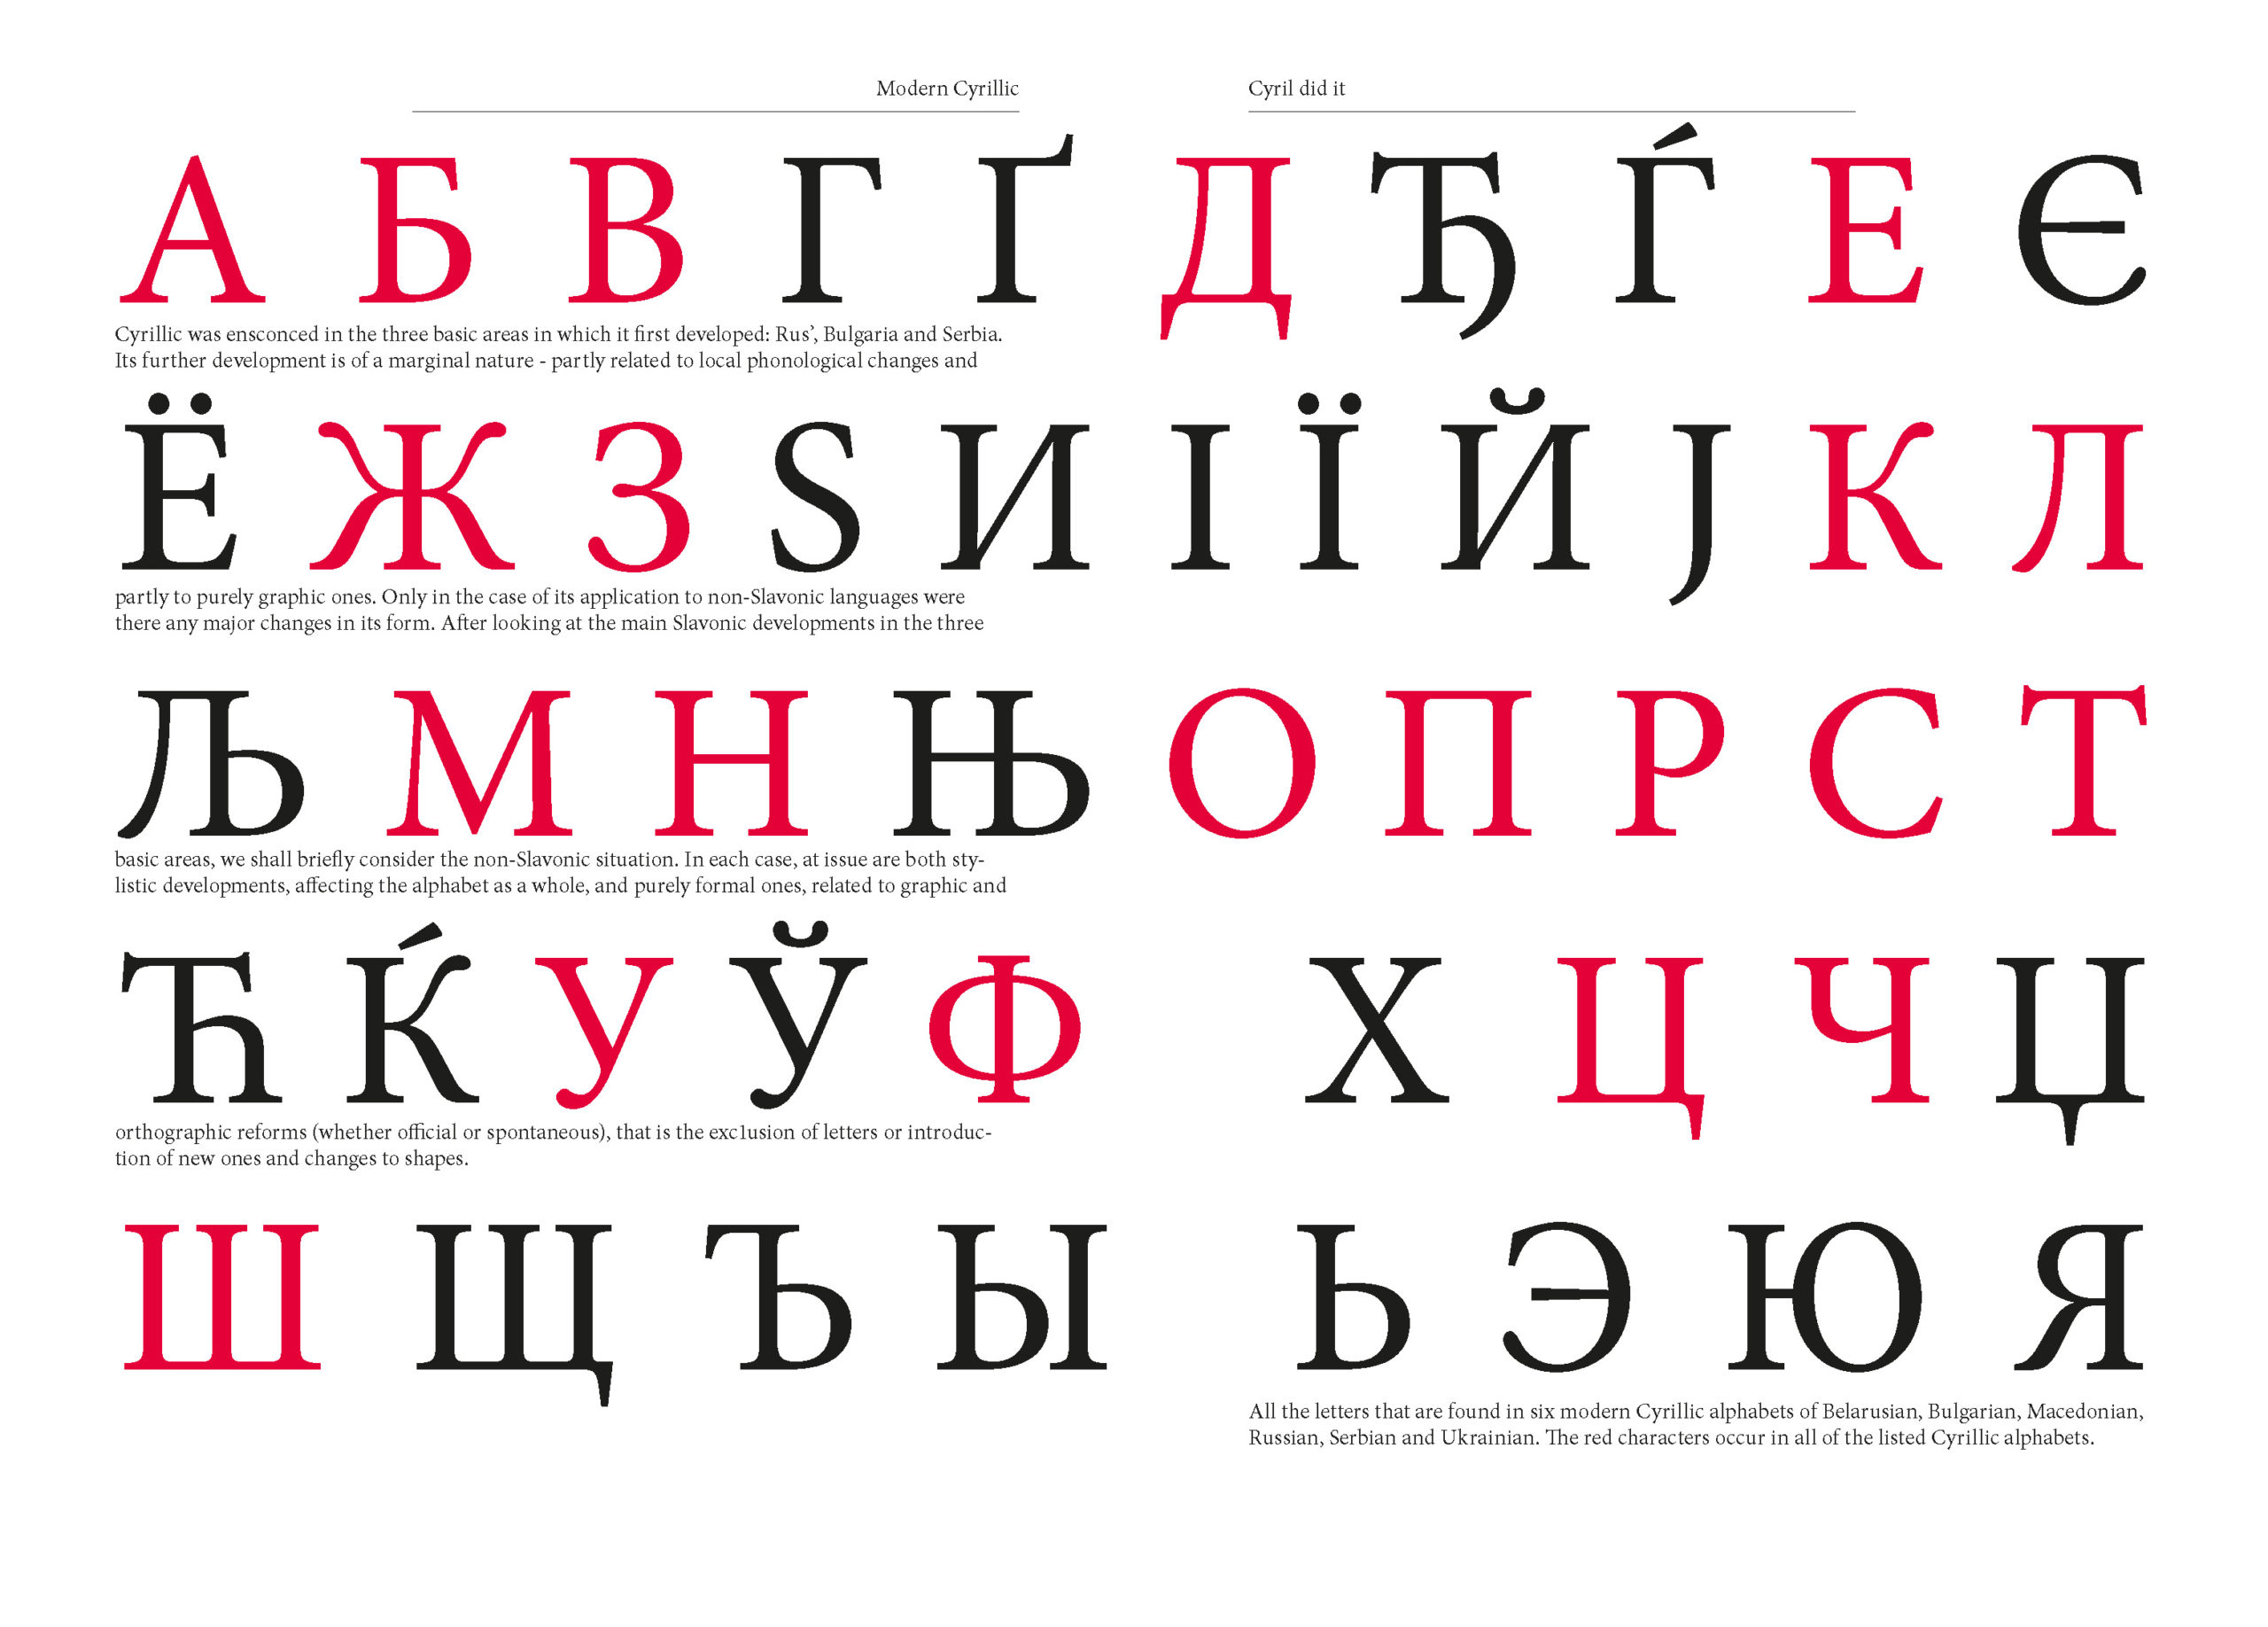 cyril-did-it-a-celebration-of-the-cyrillic-alphabet-local-fonts